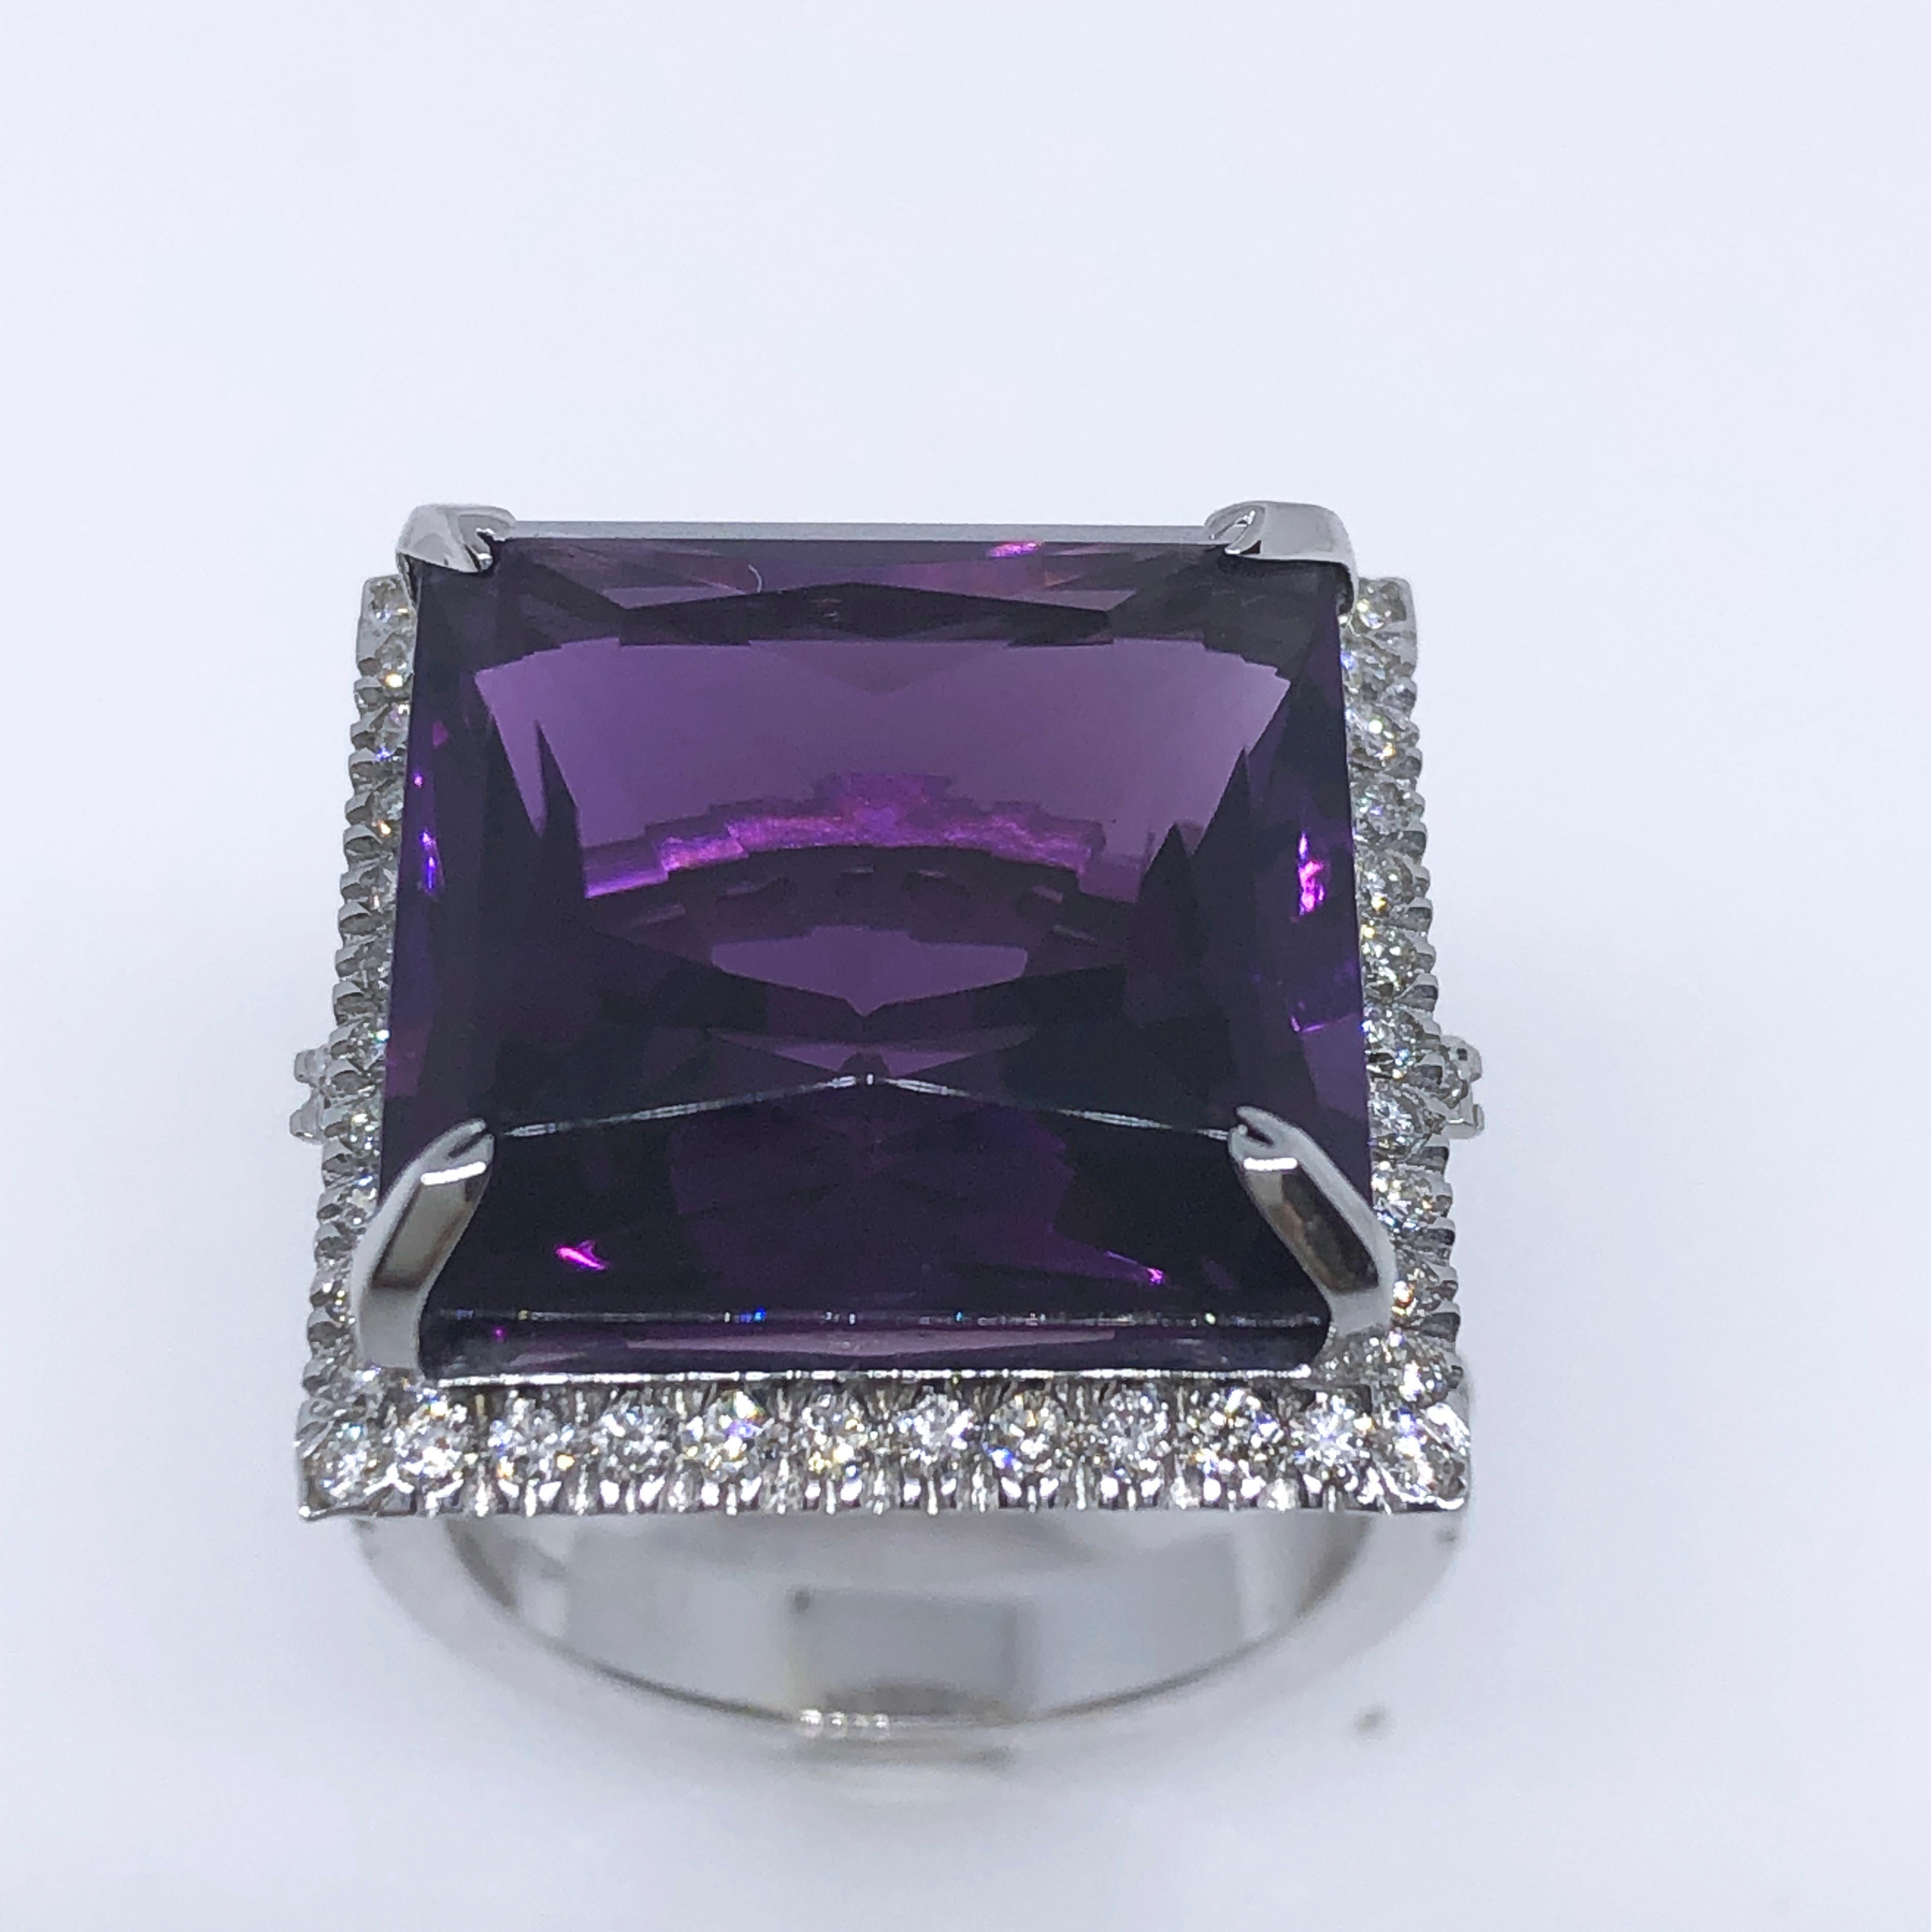 Sumptuous and One-of-a-kind Cocktail Ring featuring a 15.10 Carat Princess Cut Natural Velvety Purple Amethyst in a 0.98Carat, 66 round White Diamond 18 Carat White Gold Setting.
In our fitted Burgundy Leather Case.

Amethyst 0.600x0.605inches
0.287